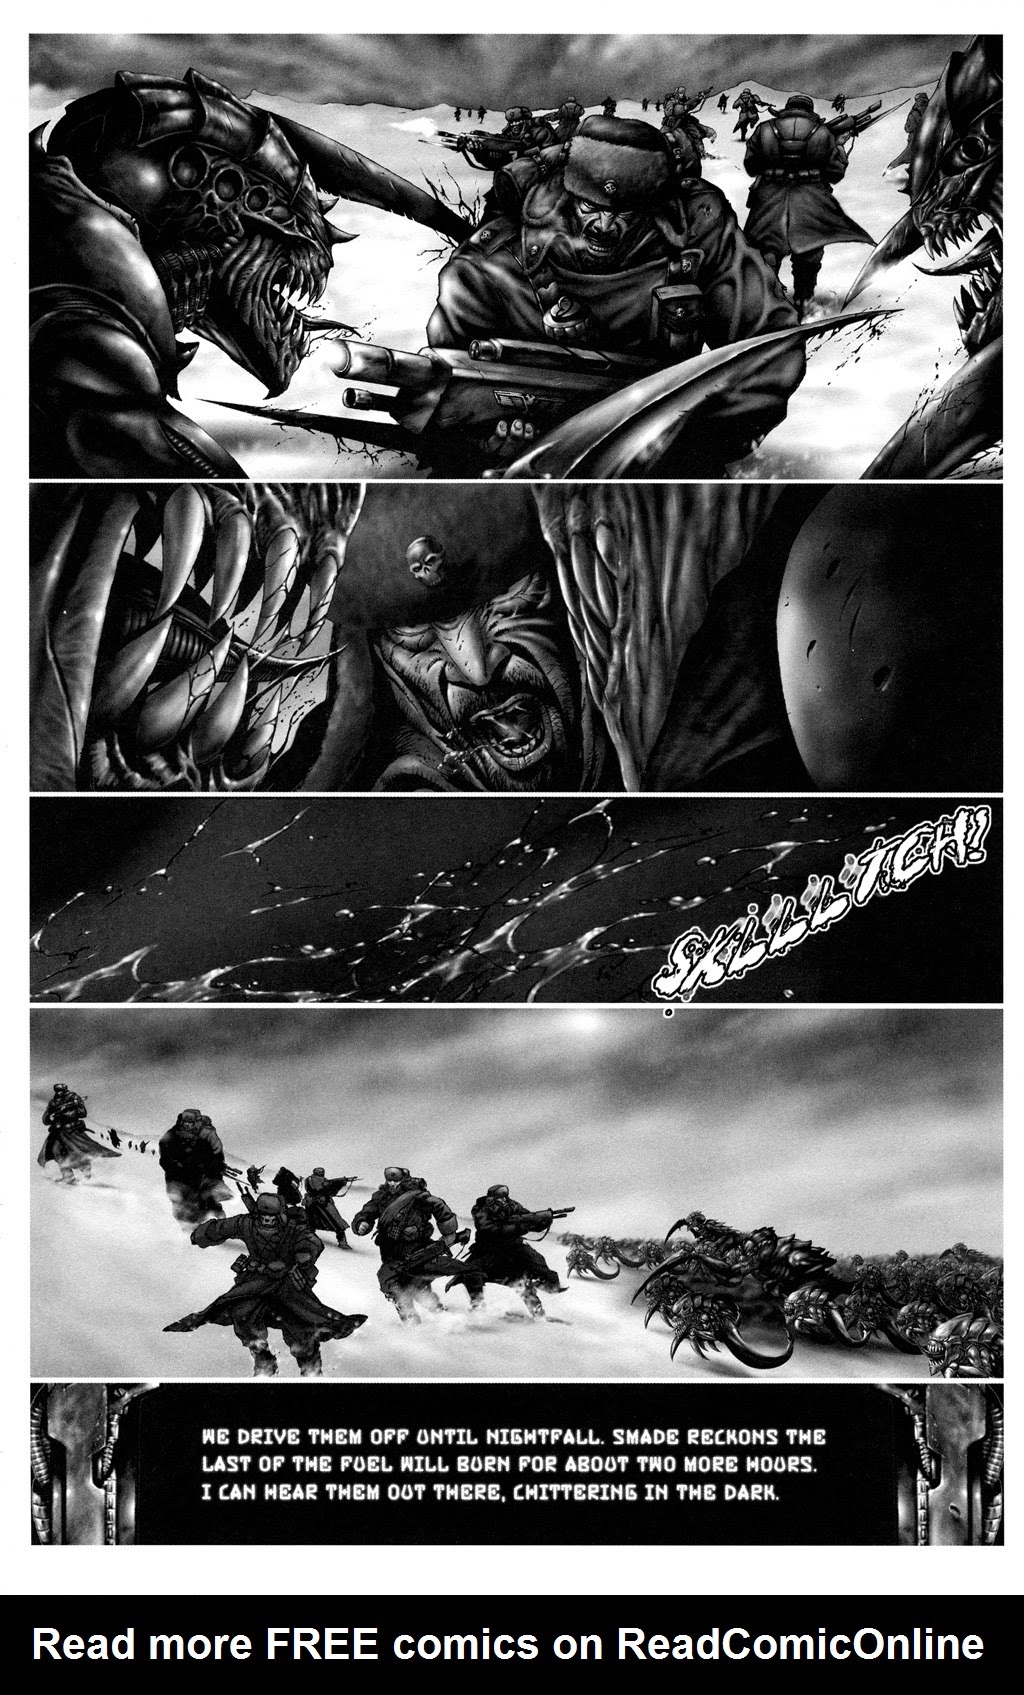 Read online Warhammer 40,000: Lone Wolves comic -  Issue # TPB - 12